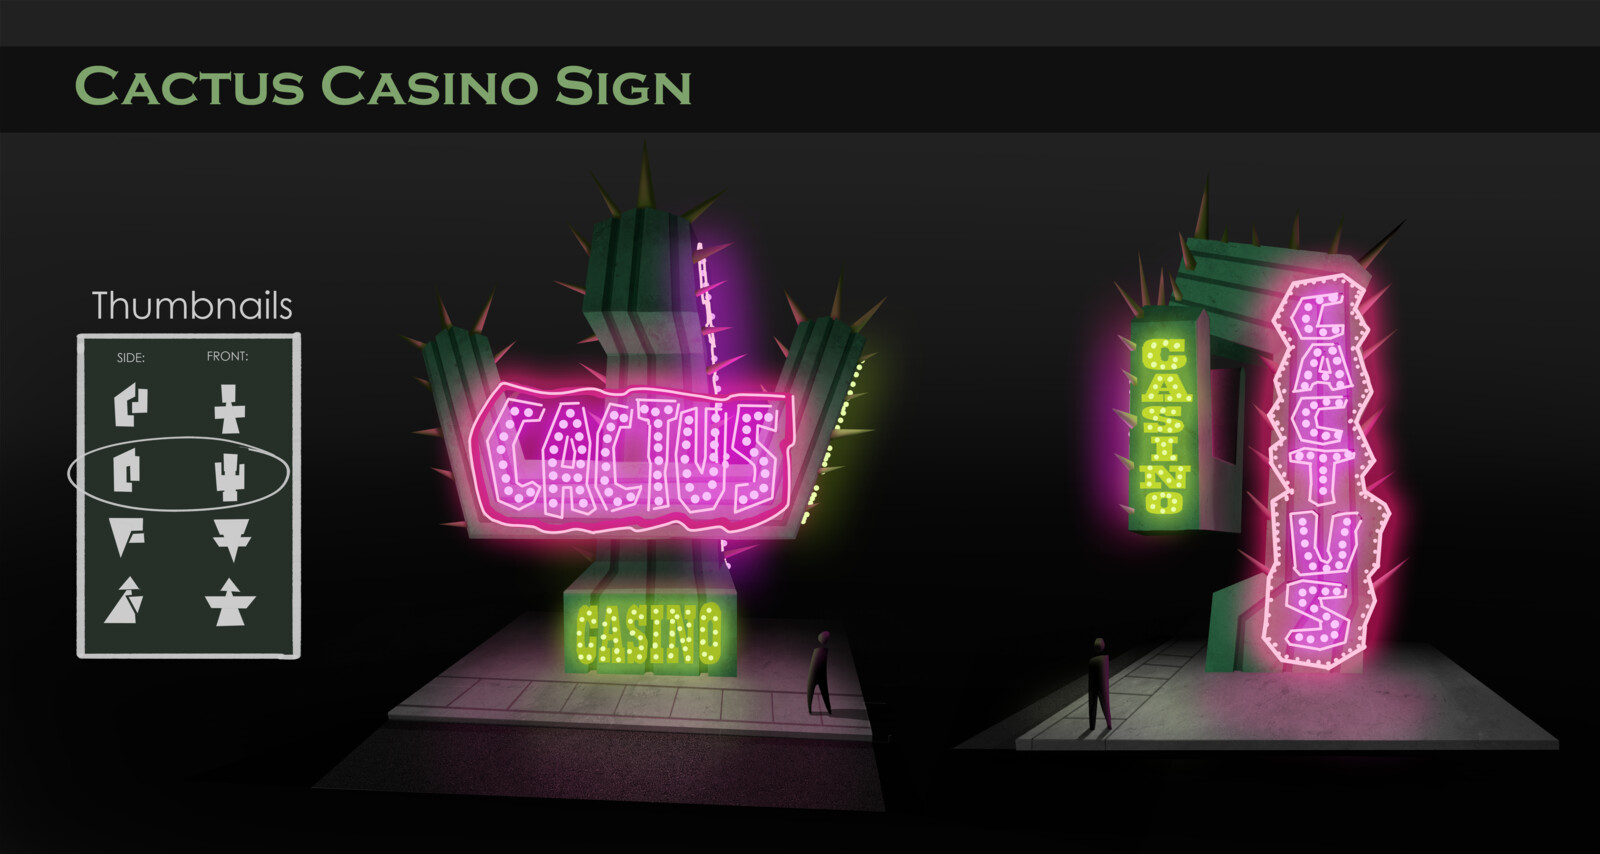 A very spiky casino sign, visible from front and side.